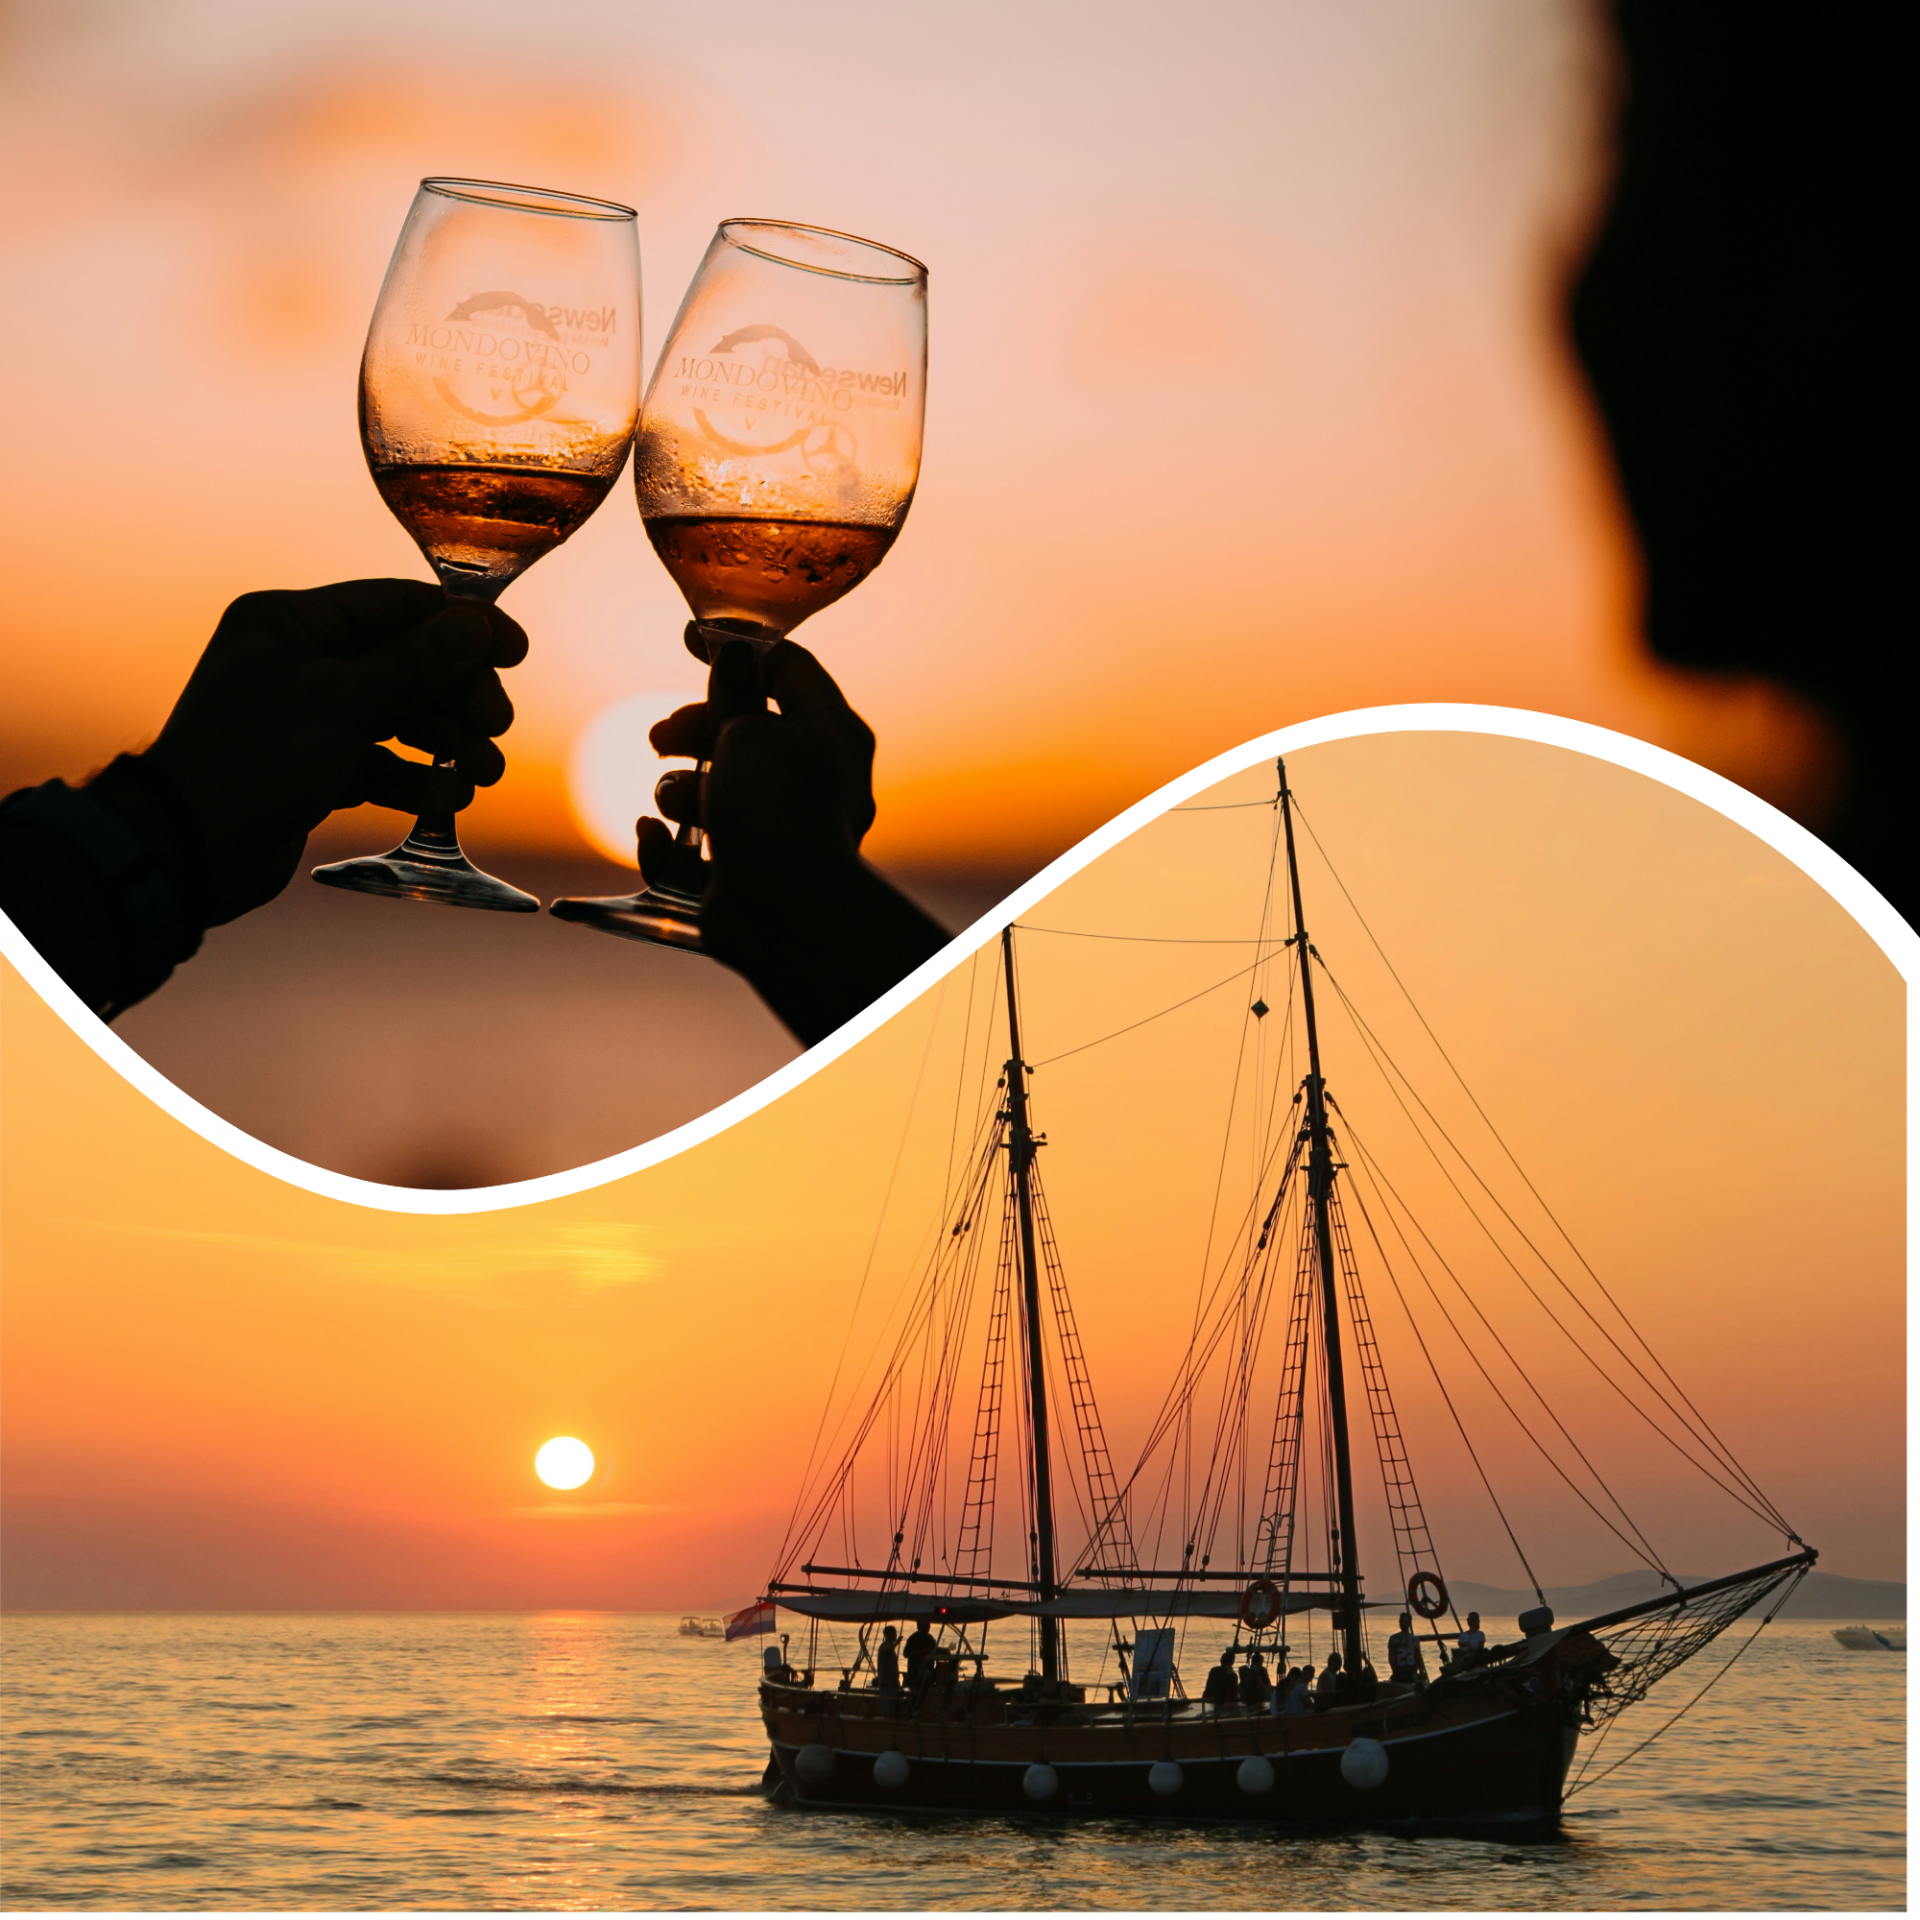 outdoor activities, celebrate, boat and sunset